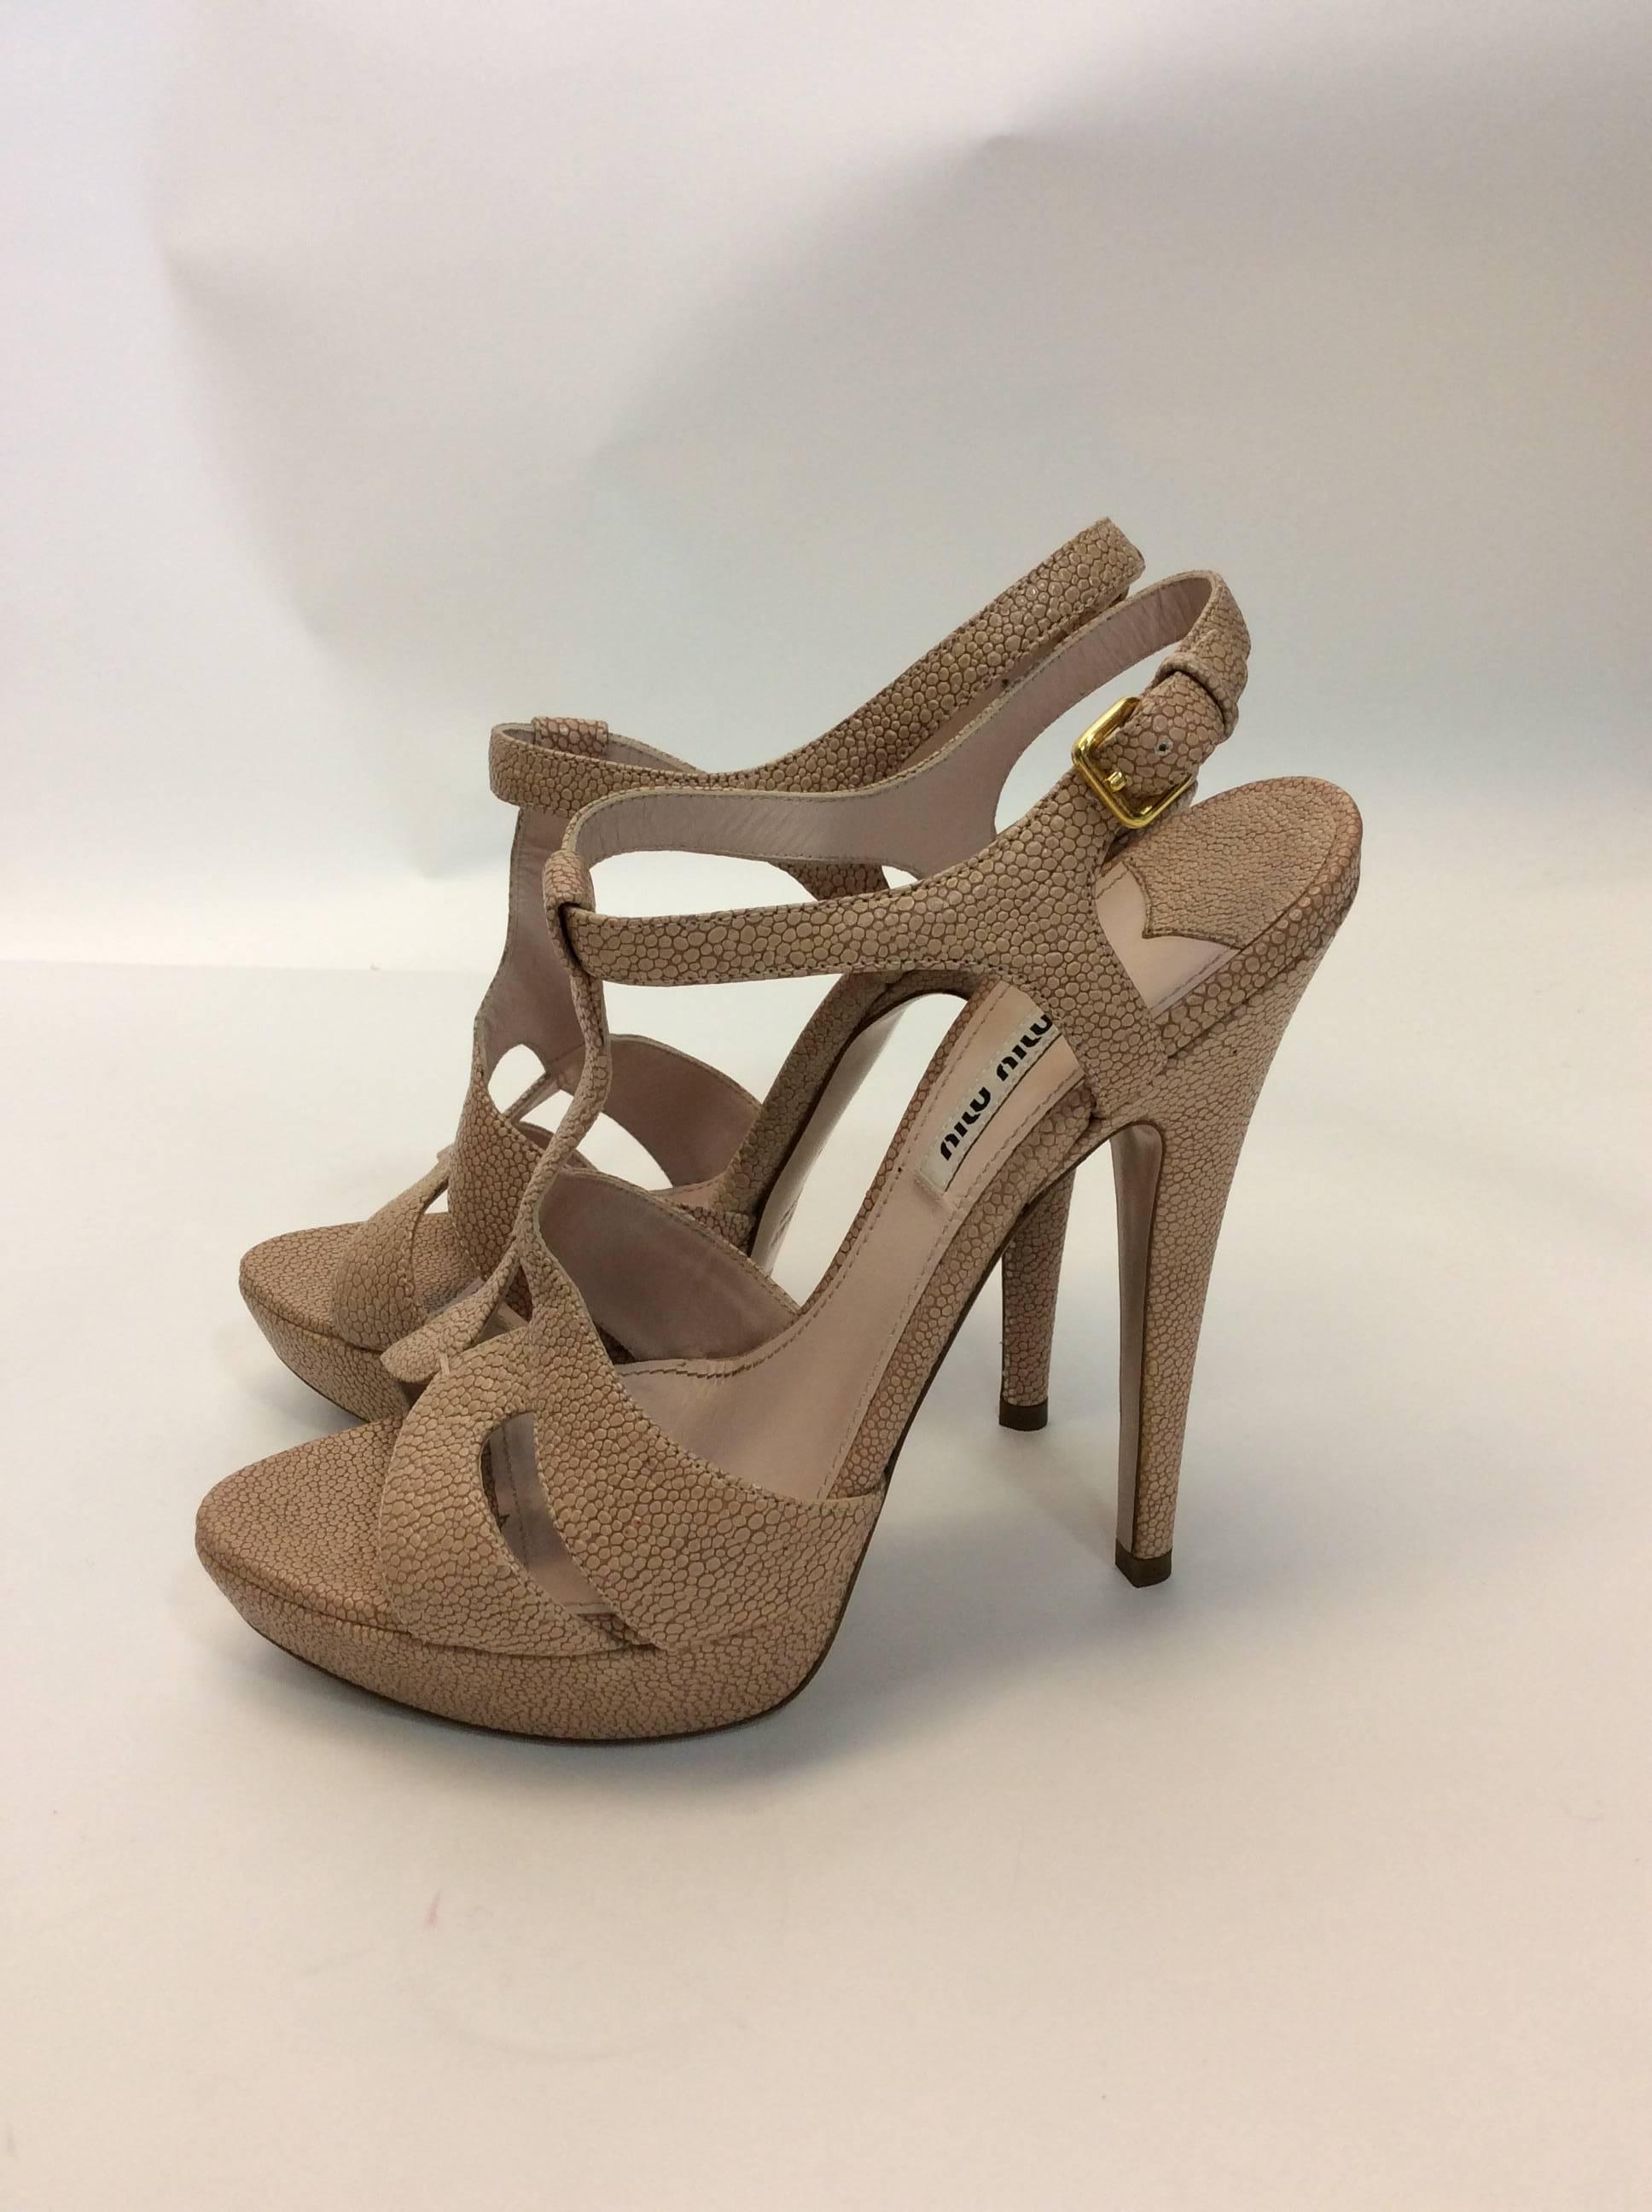 Miu Miu New Nude Sandal Pumps
Never worn
Light nude/blush color
Buckle ankle strap, gold hardware
6 inch heel, 1 inch platform
Size 39
$400
Made in Italy